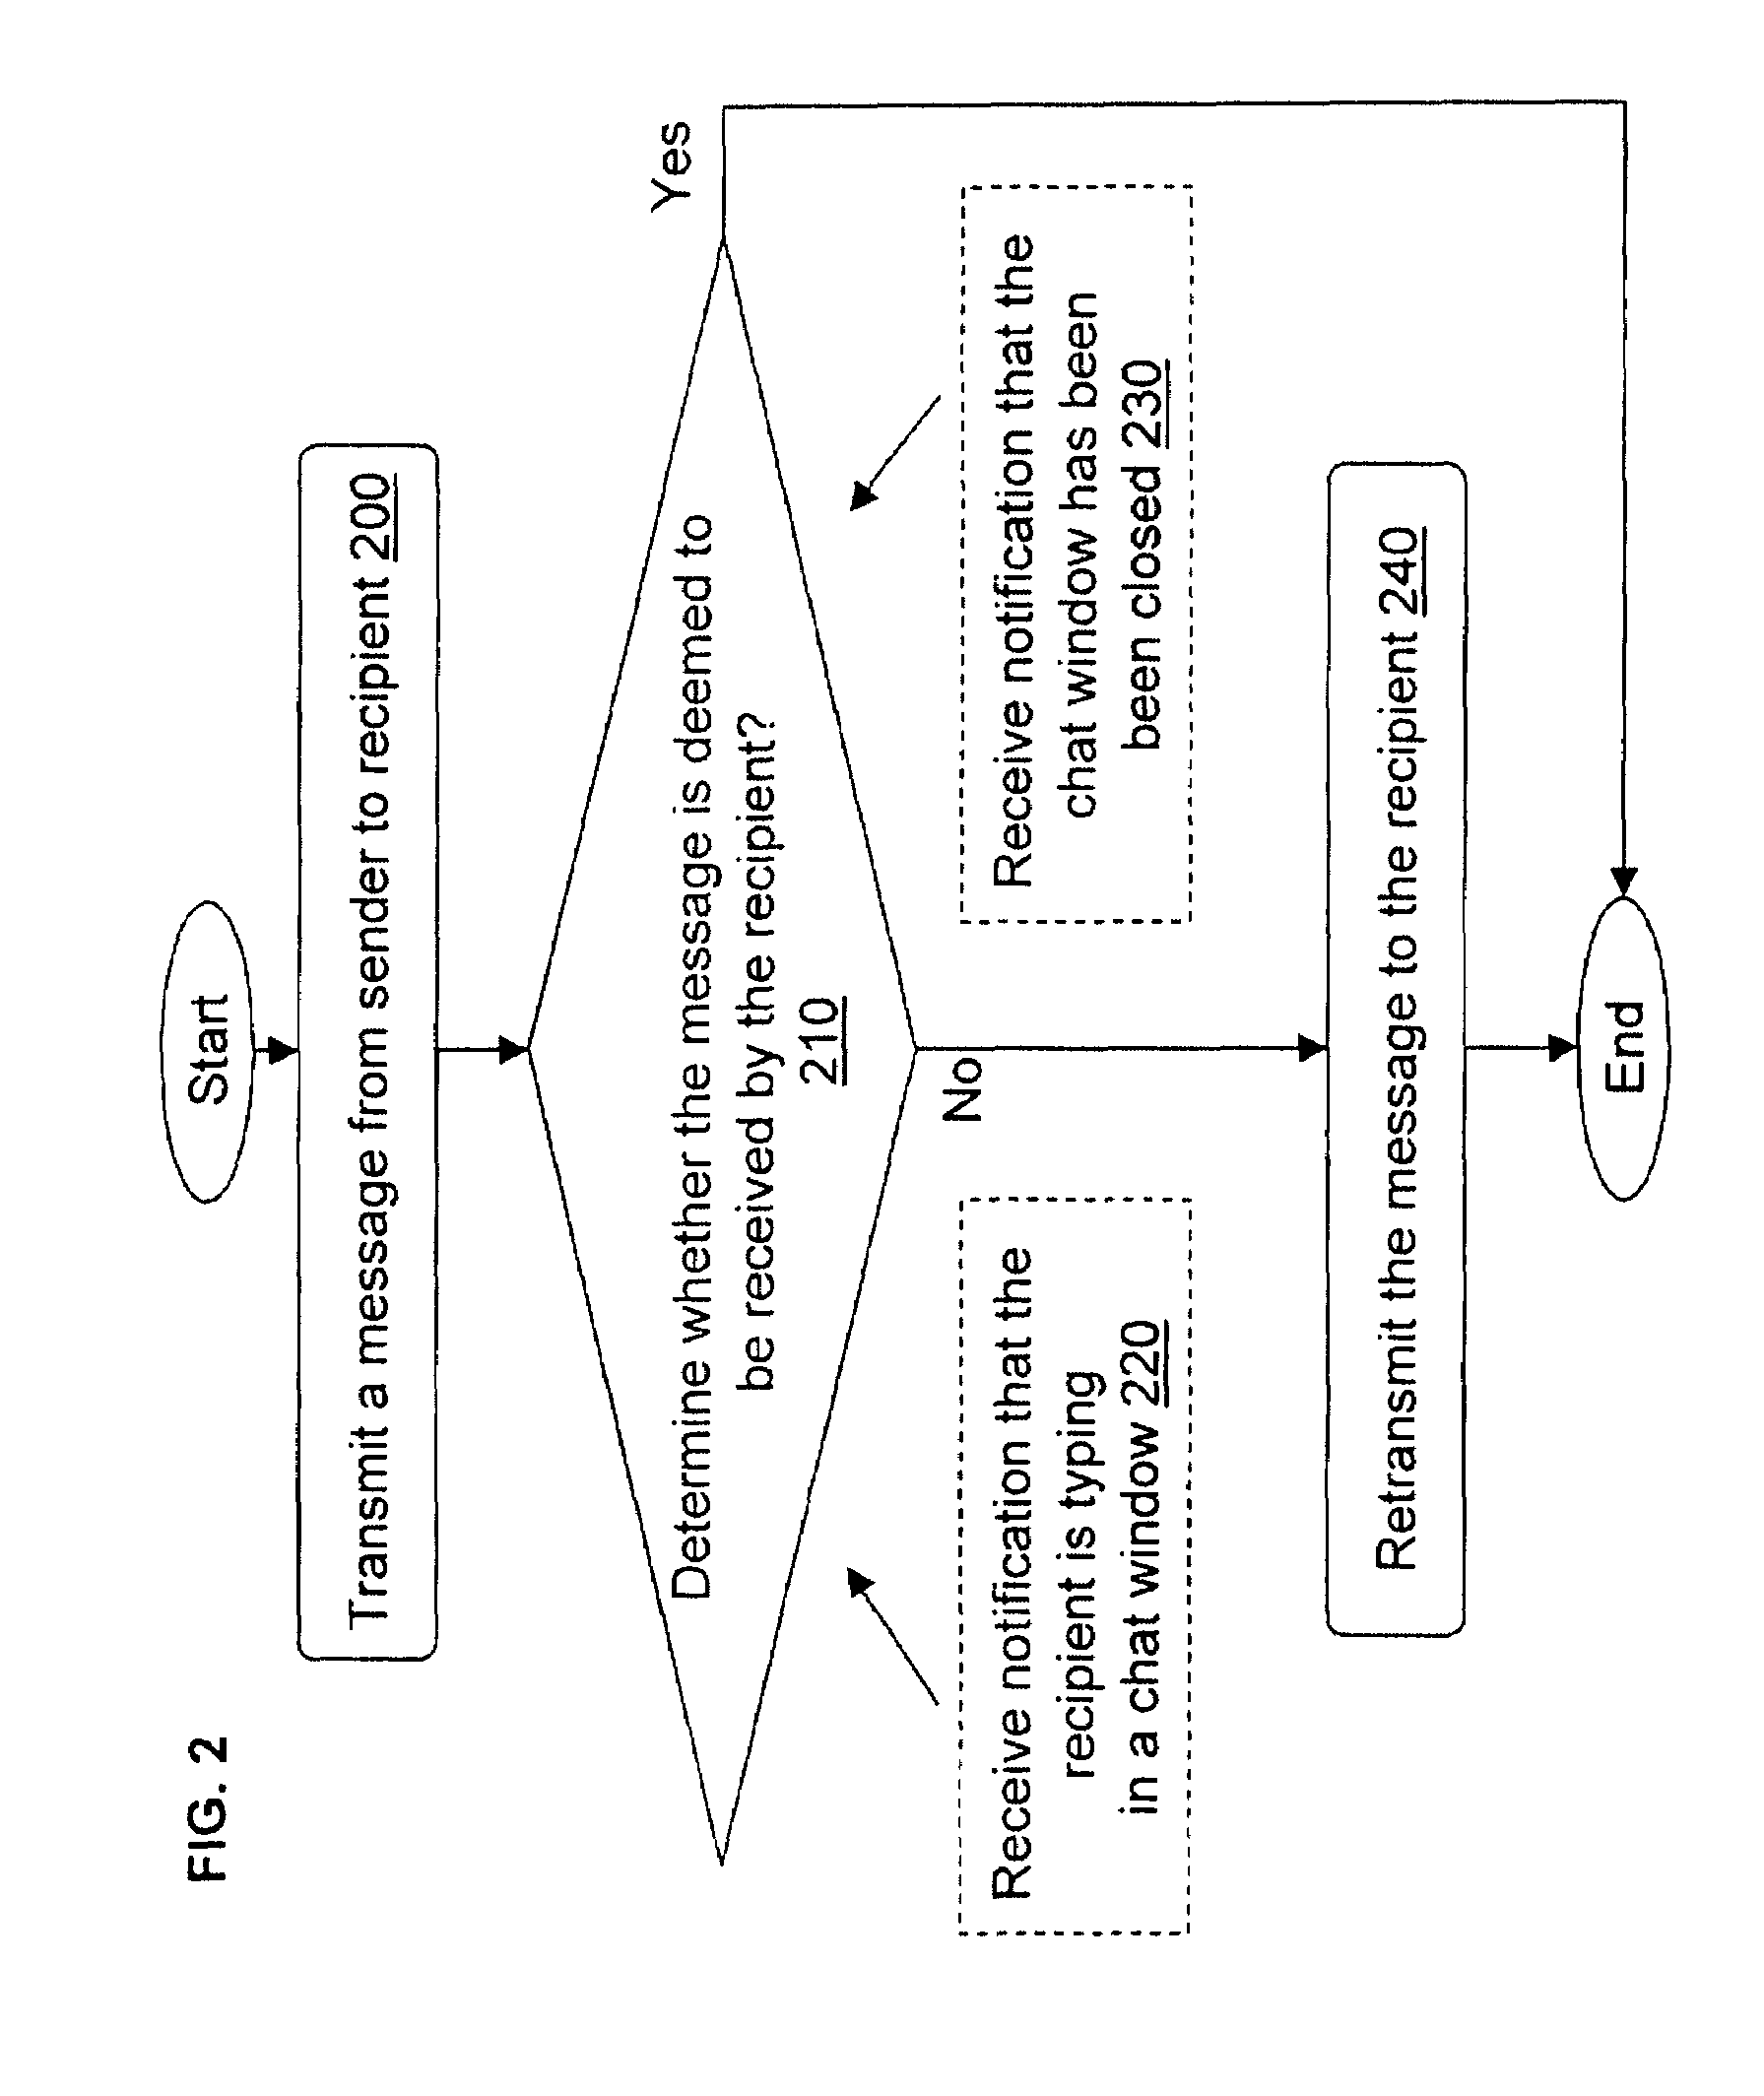 Method for redirecting an instant message in response to a notification of a change in a first MAC address to a second MAC address of a recipient